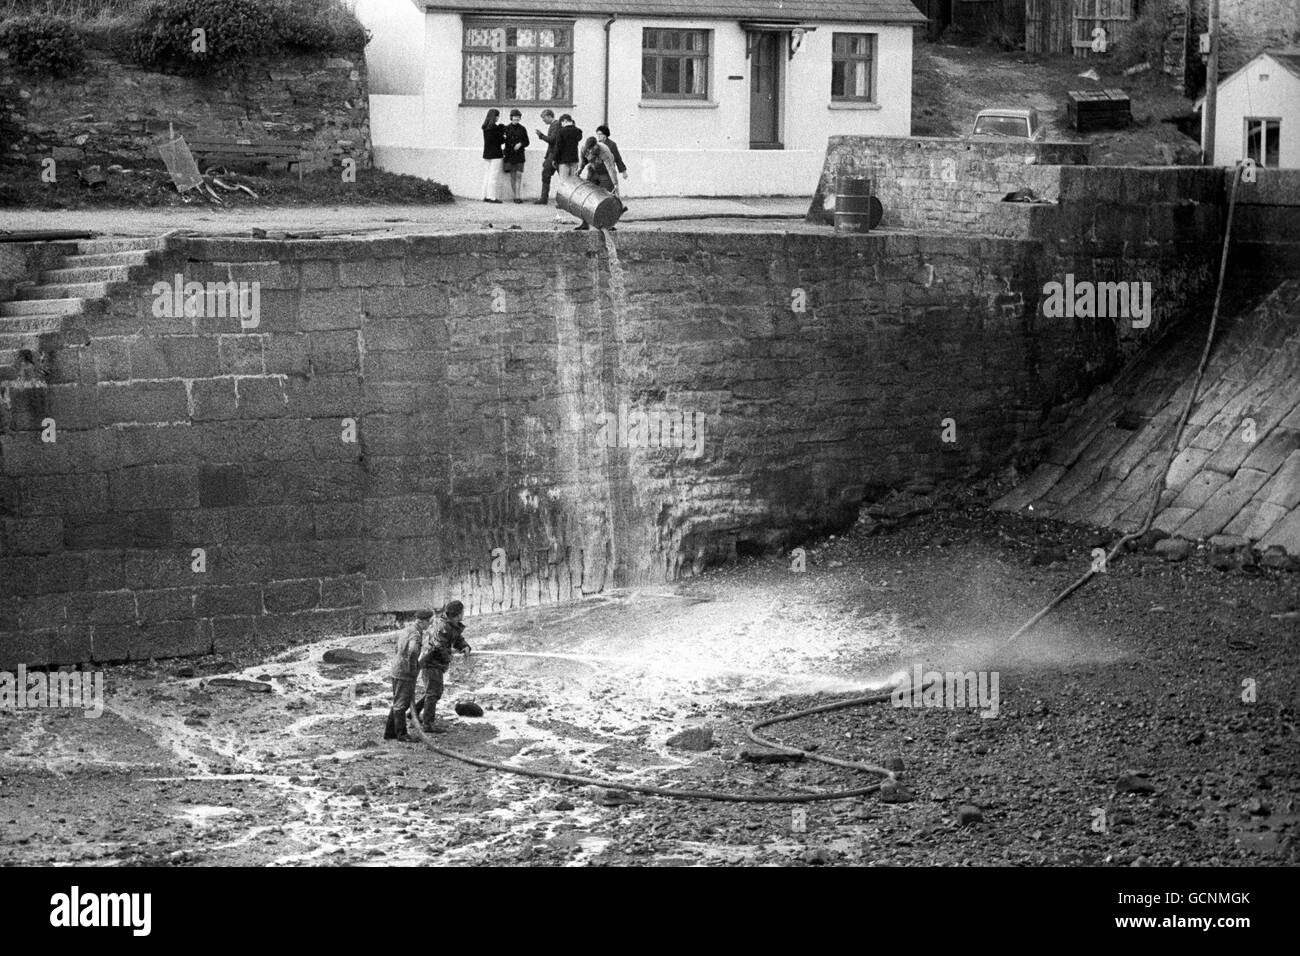 Oil from the tanker Torrey Canyon glistens on rocks as troops spray detergent at the small beach and bathing area of Dollar Cove in the Cornish hamlet of Gunwalloe. Stock Photo